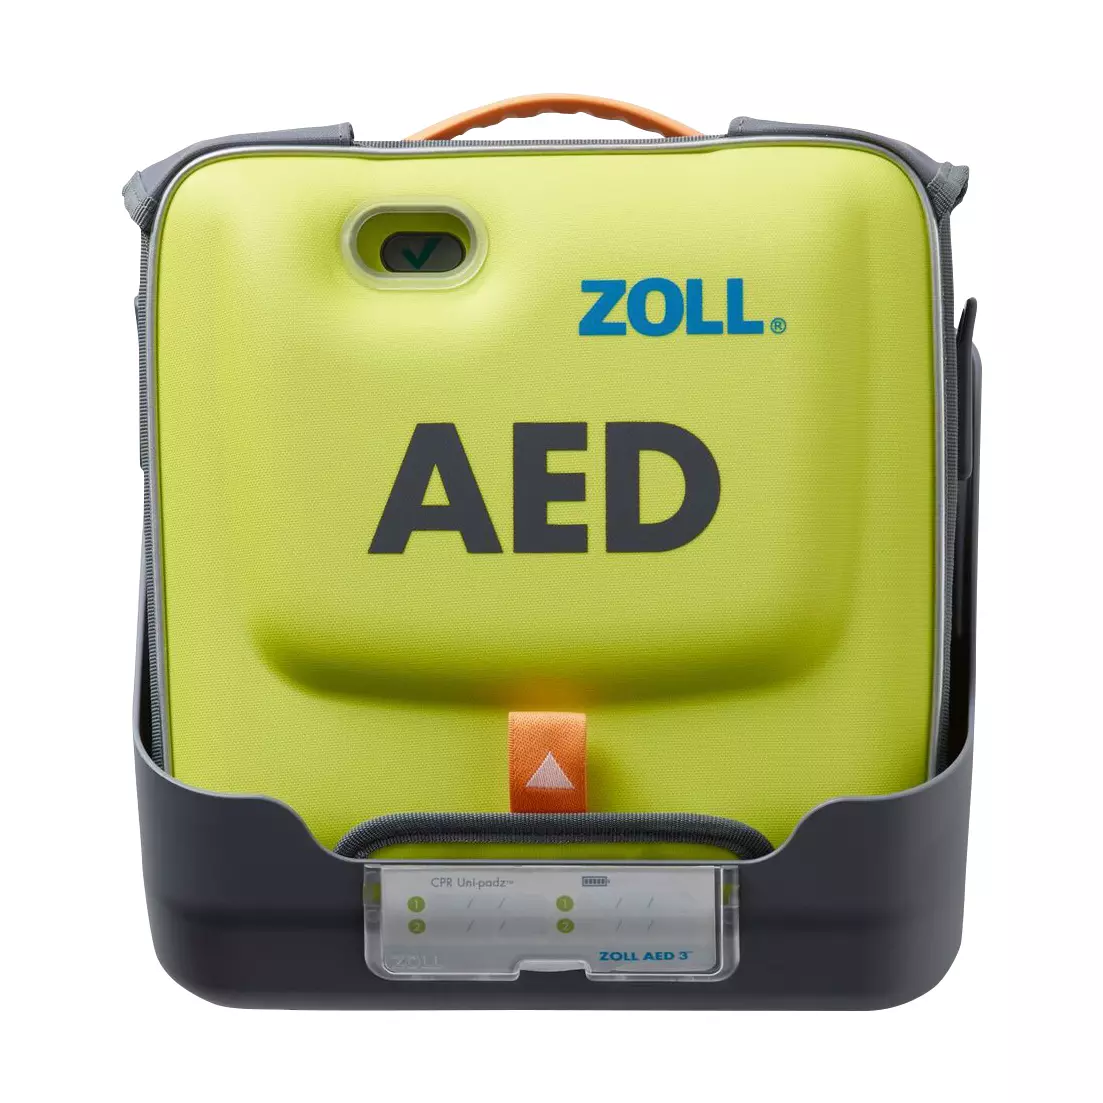 ZOLL AED 3 wall mount